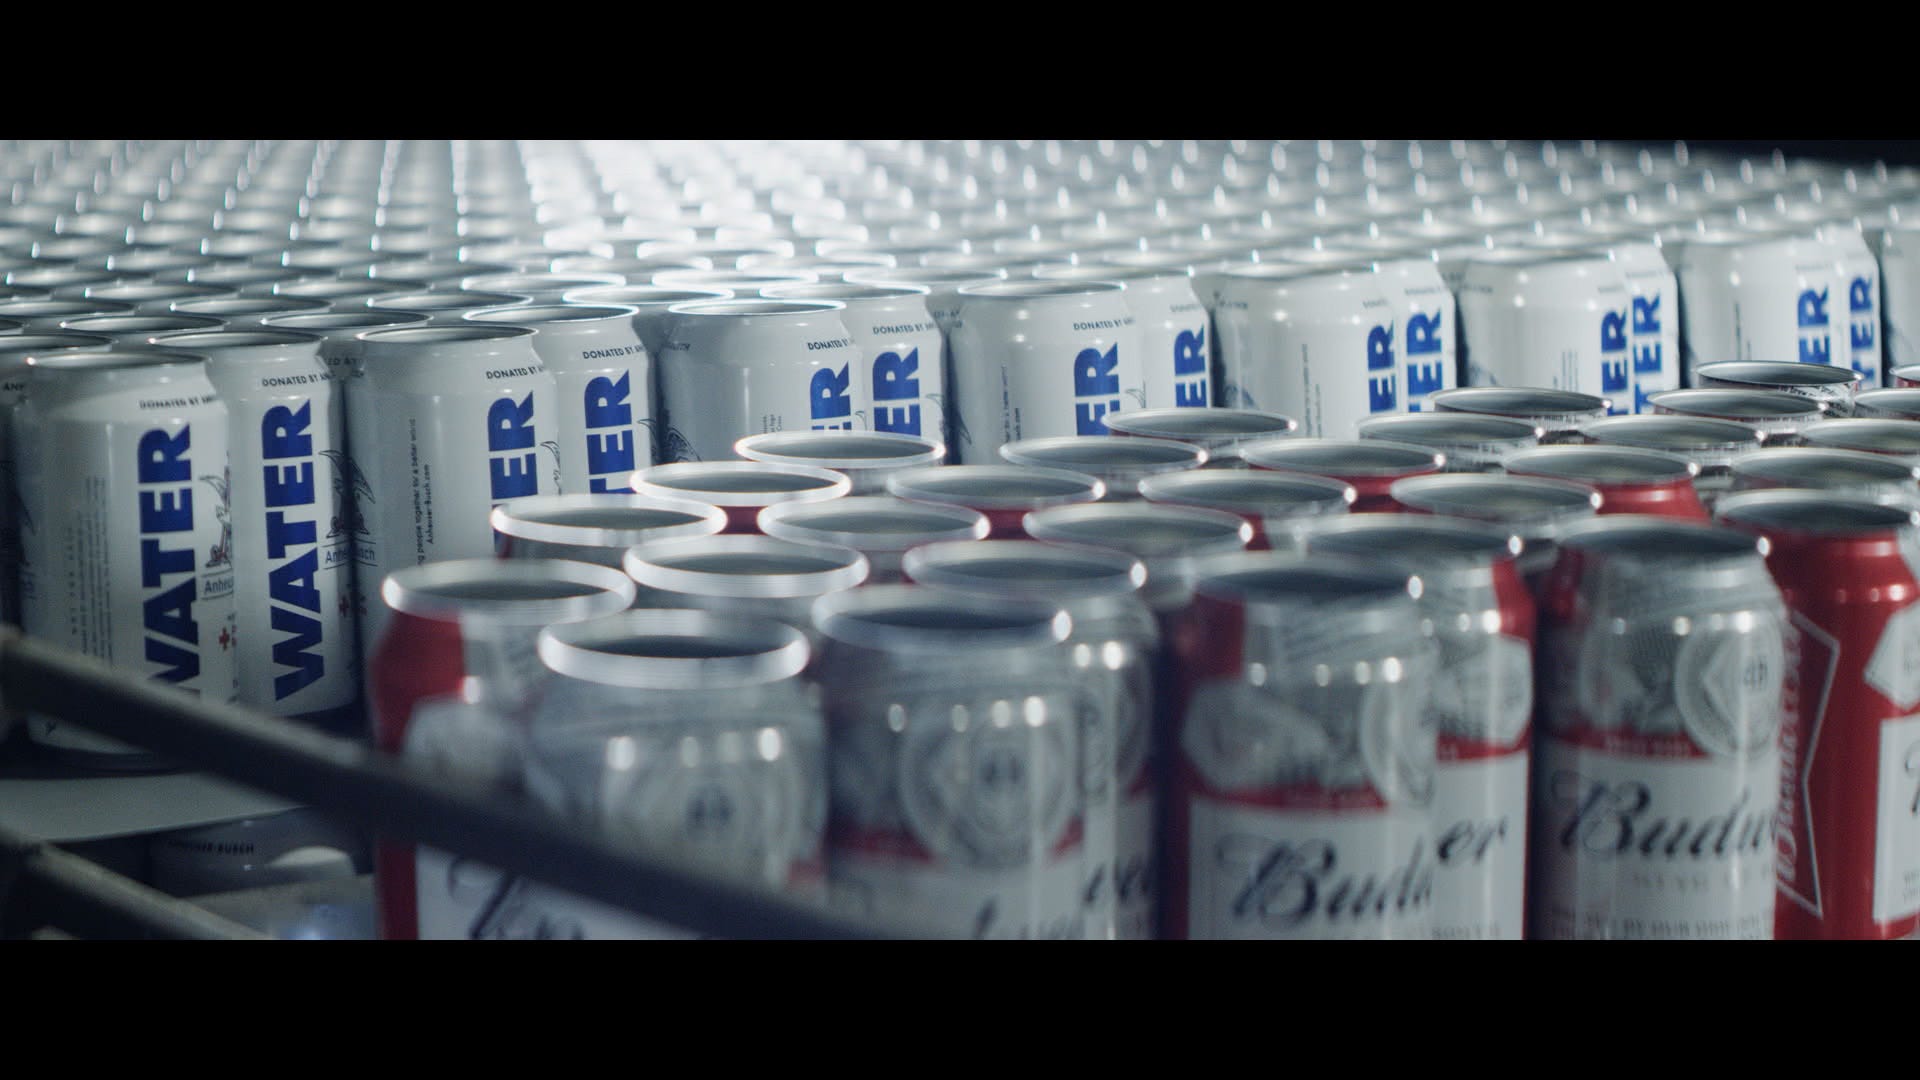 Budweiser's latest heart-tugging Super Bowl ad